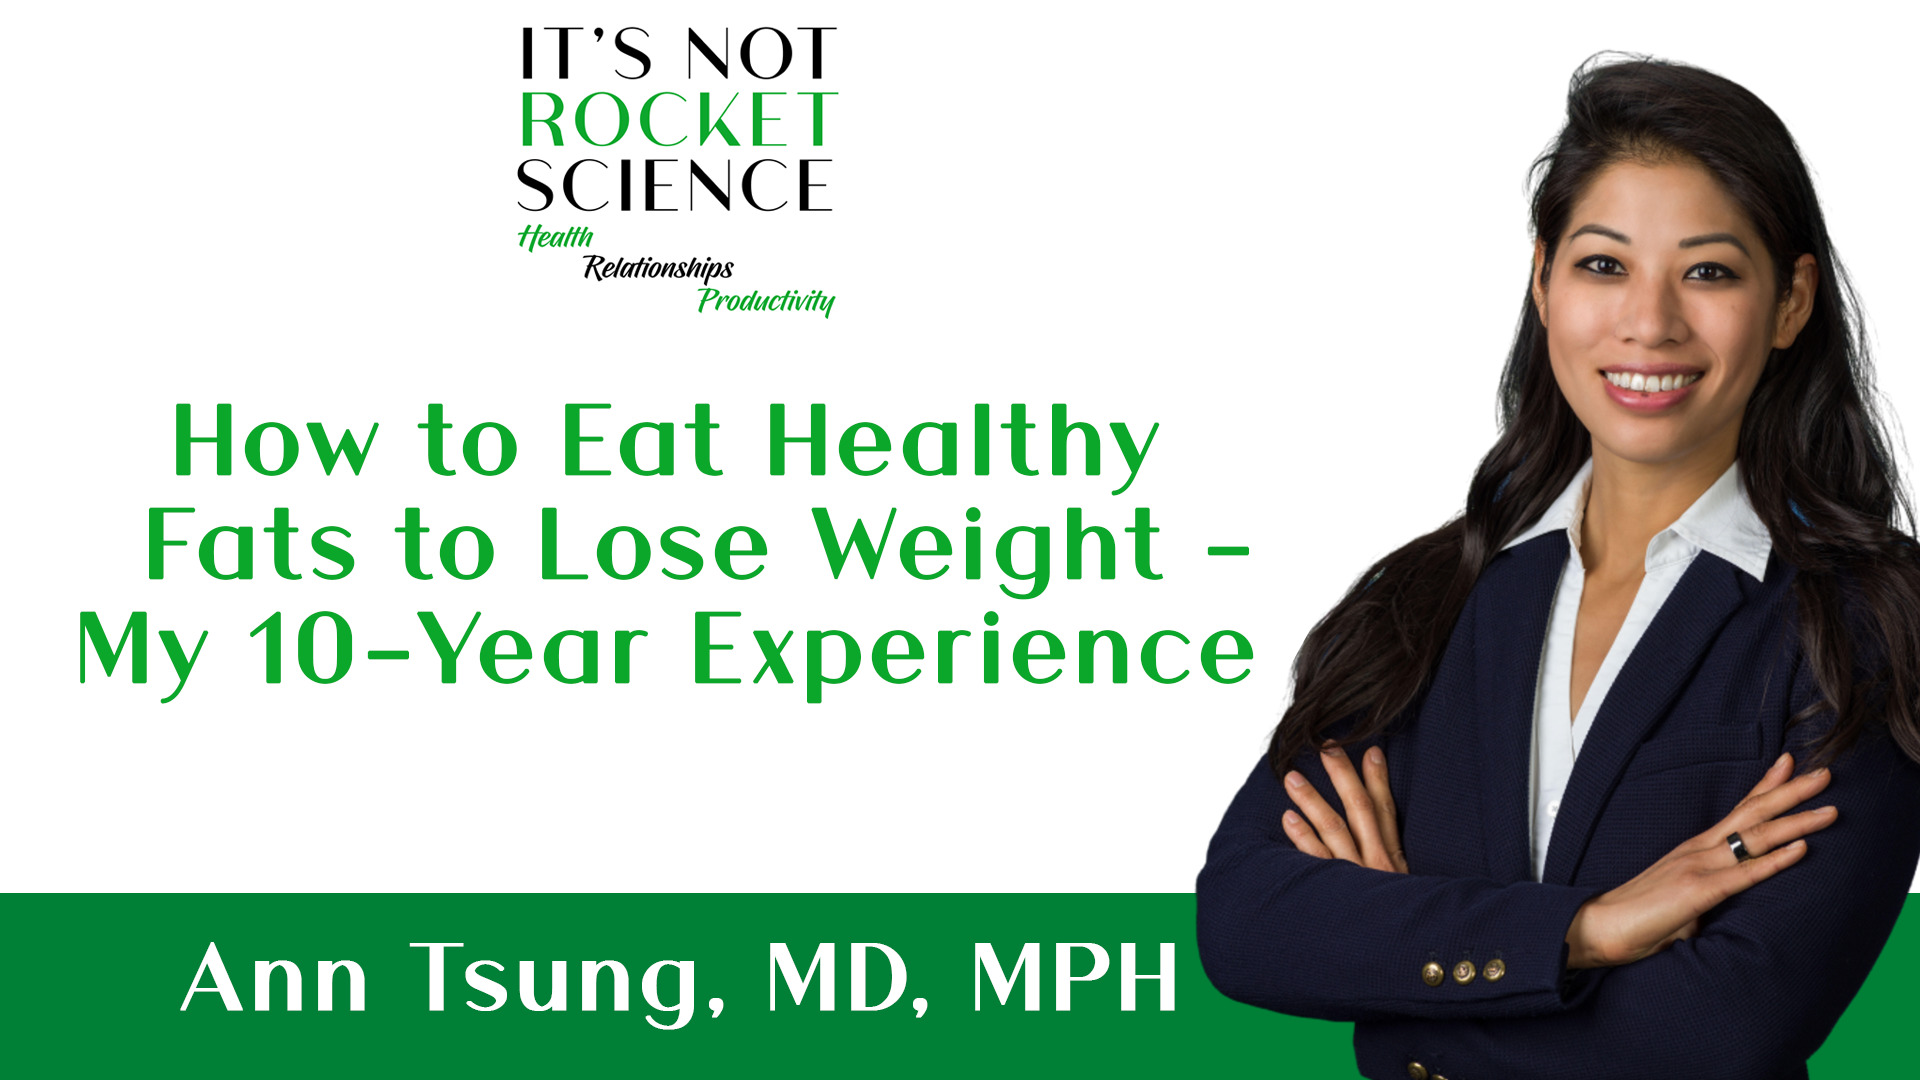 044. How to Eat Healthy Fats to Lose Weight – My 10-Year Experience